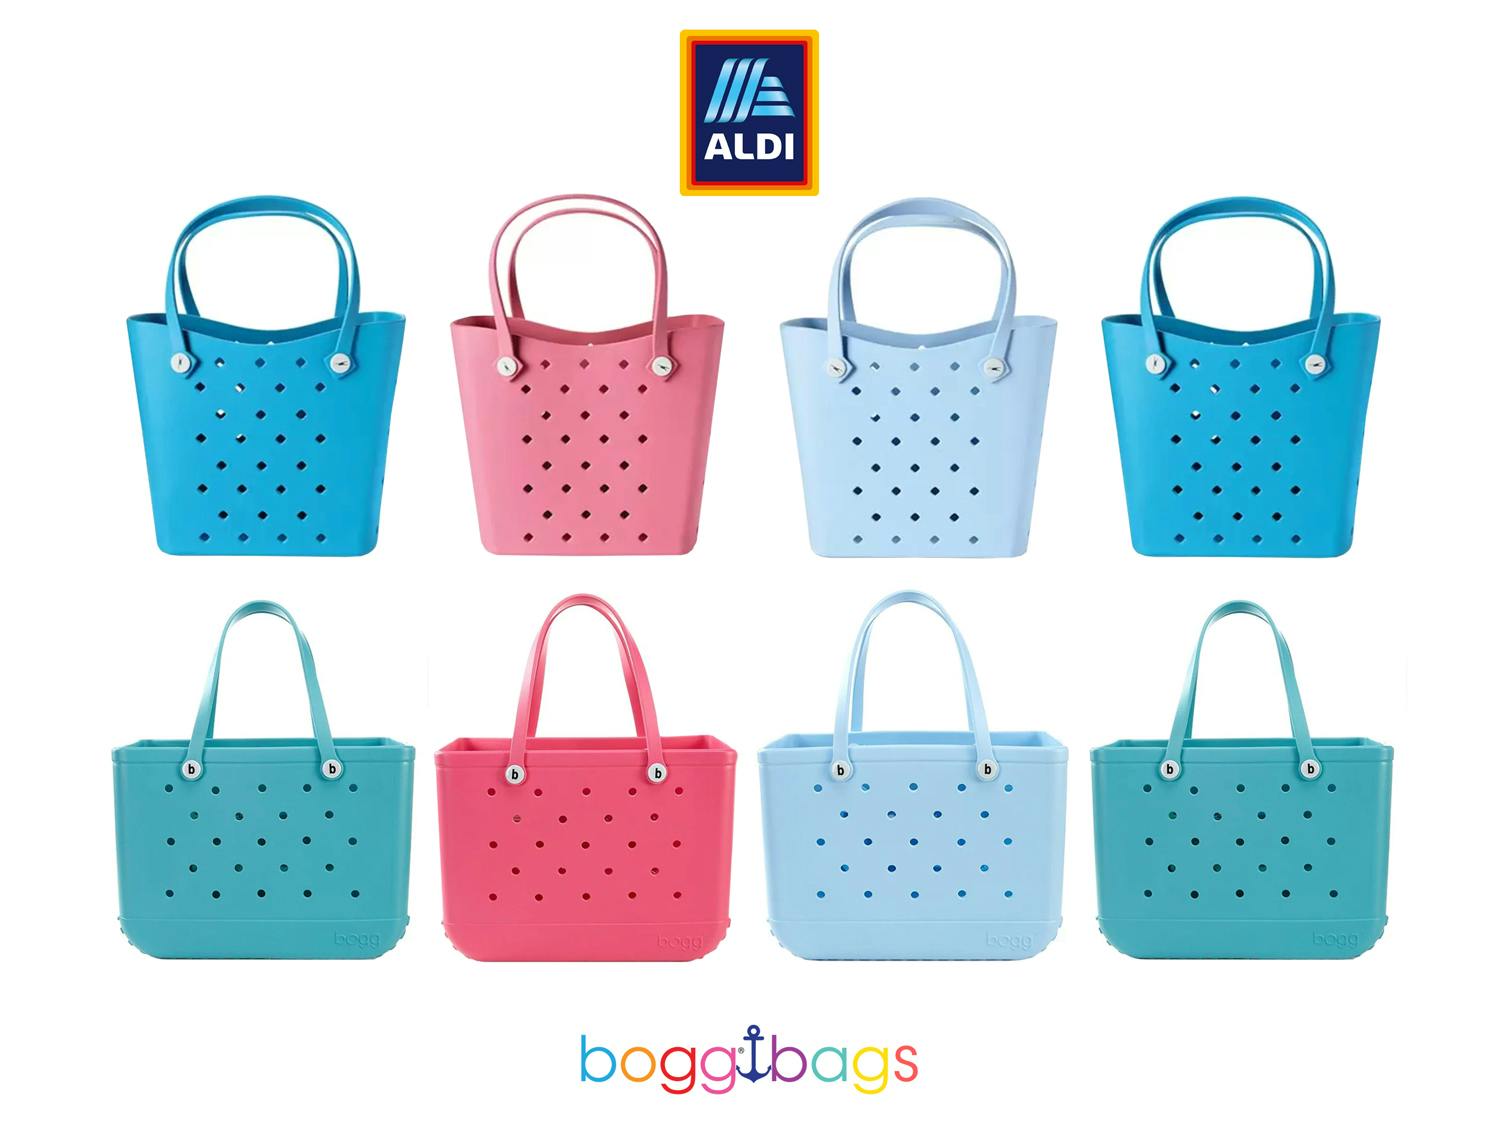 Bogg Bag Lookalikes  Where to Buy at the Best Prices